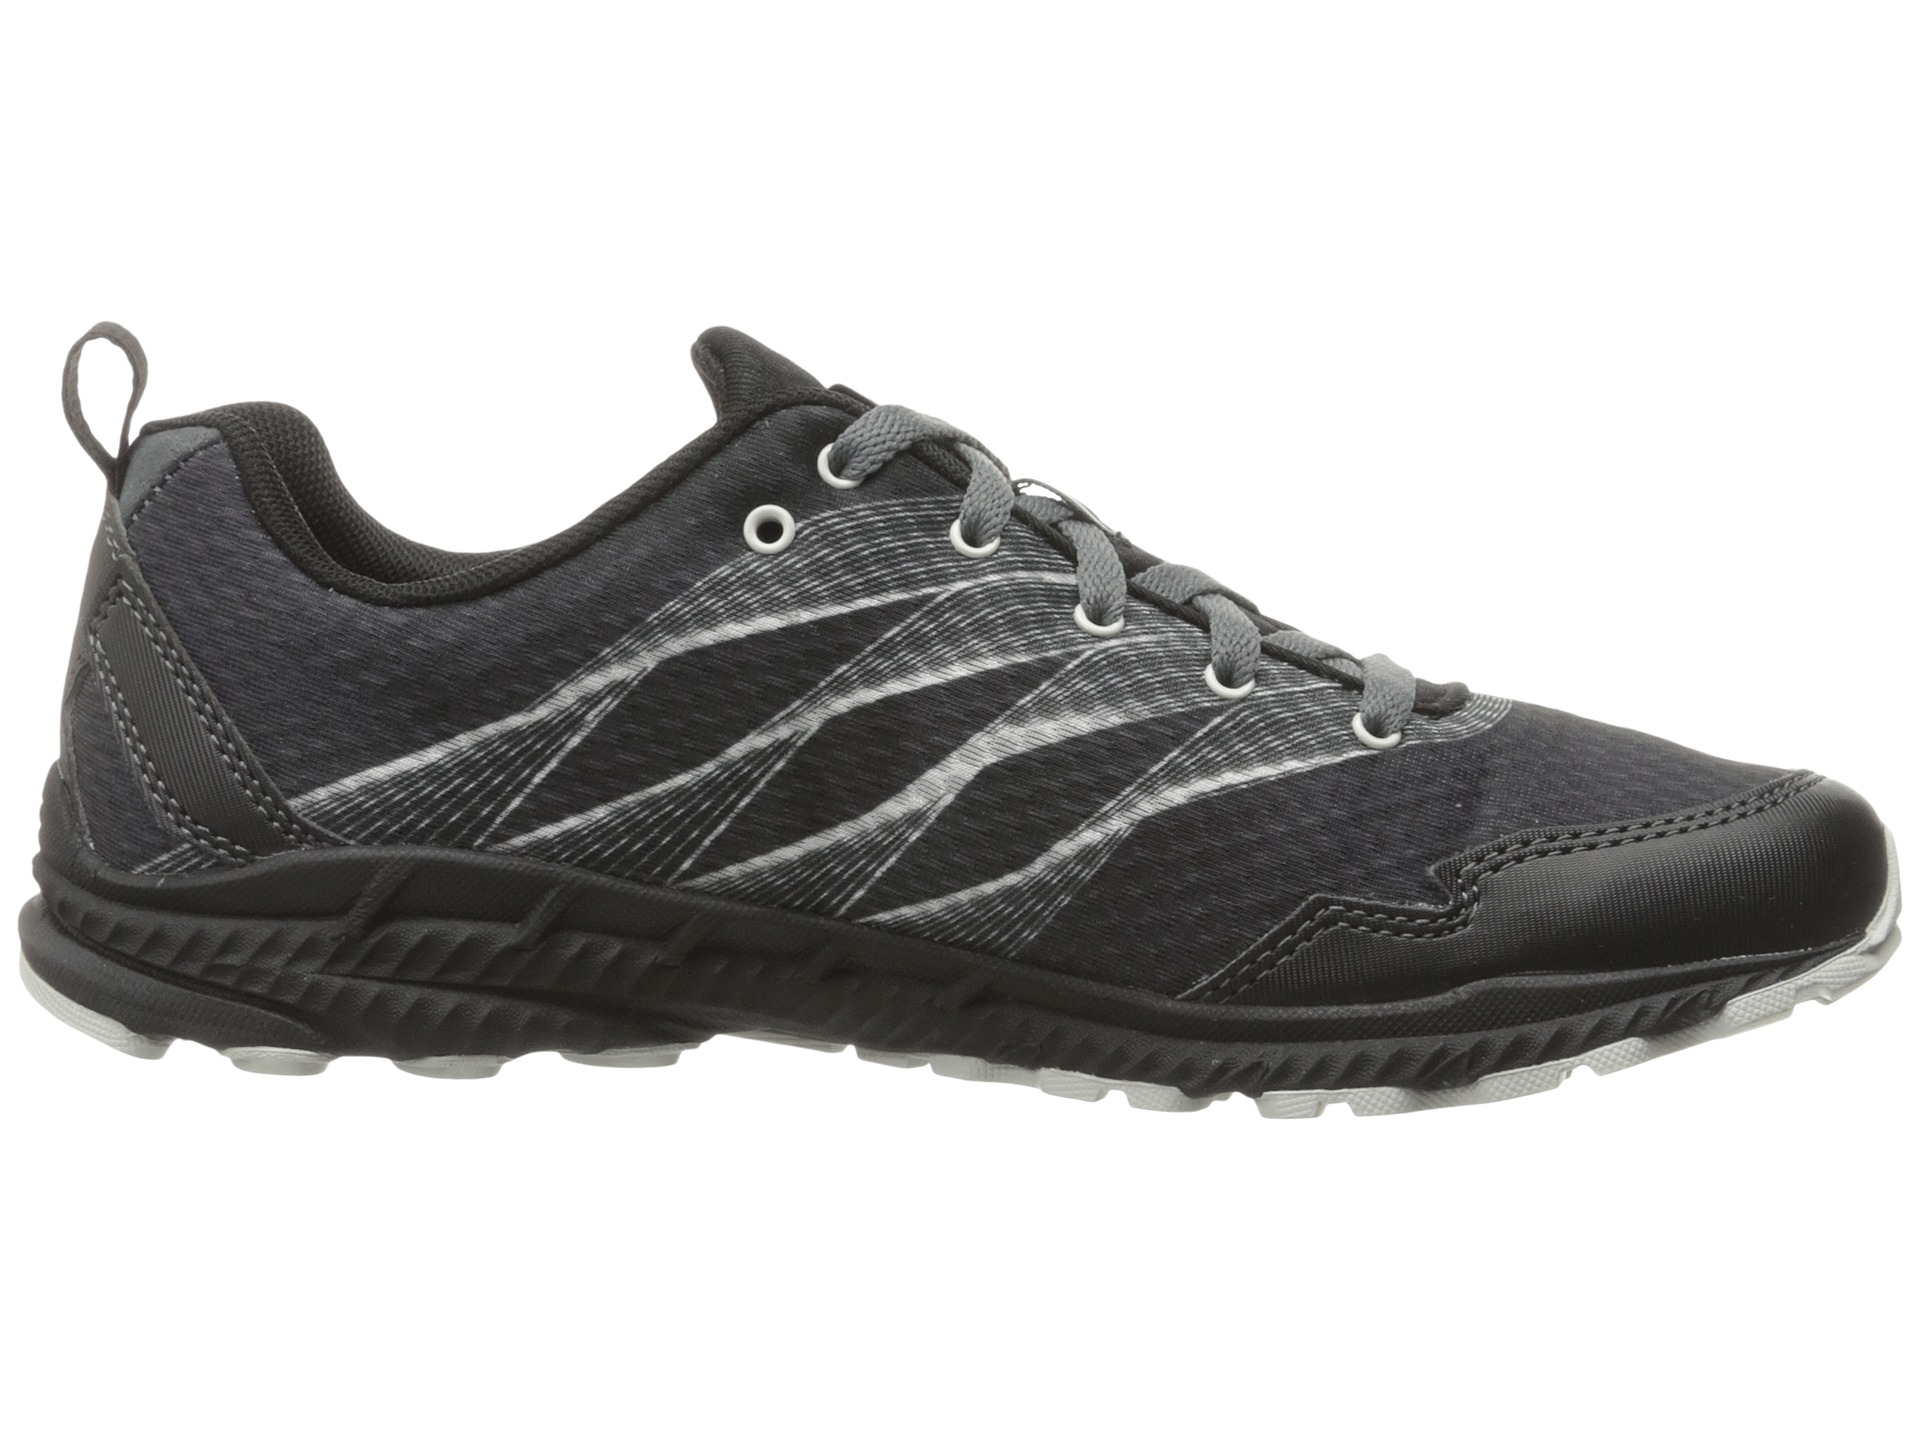 Merrell Trail Crusher at Zappos.com